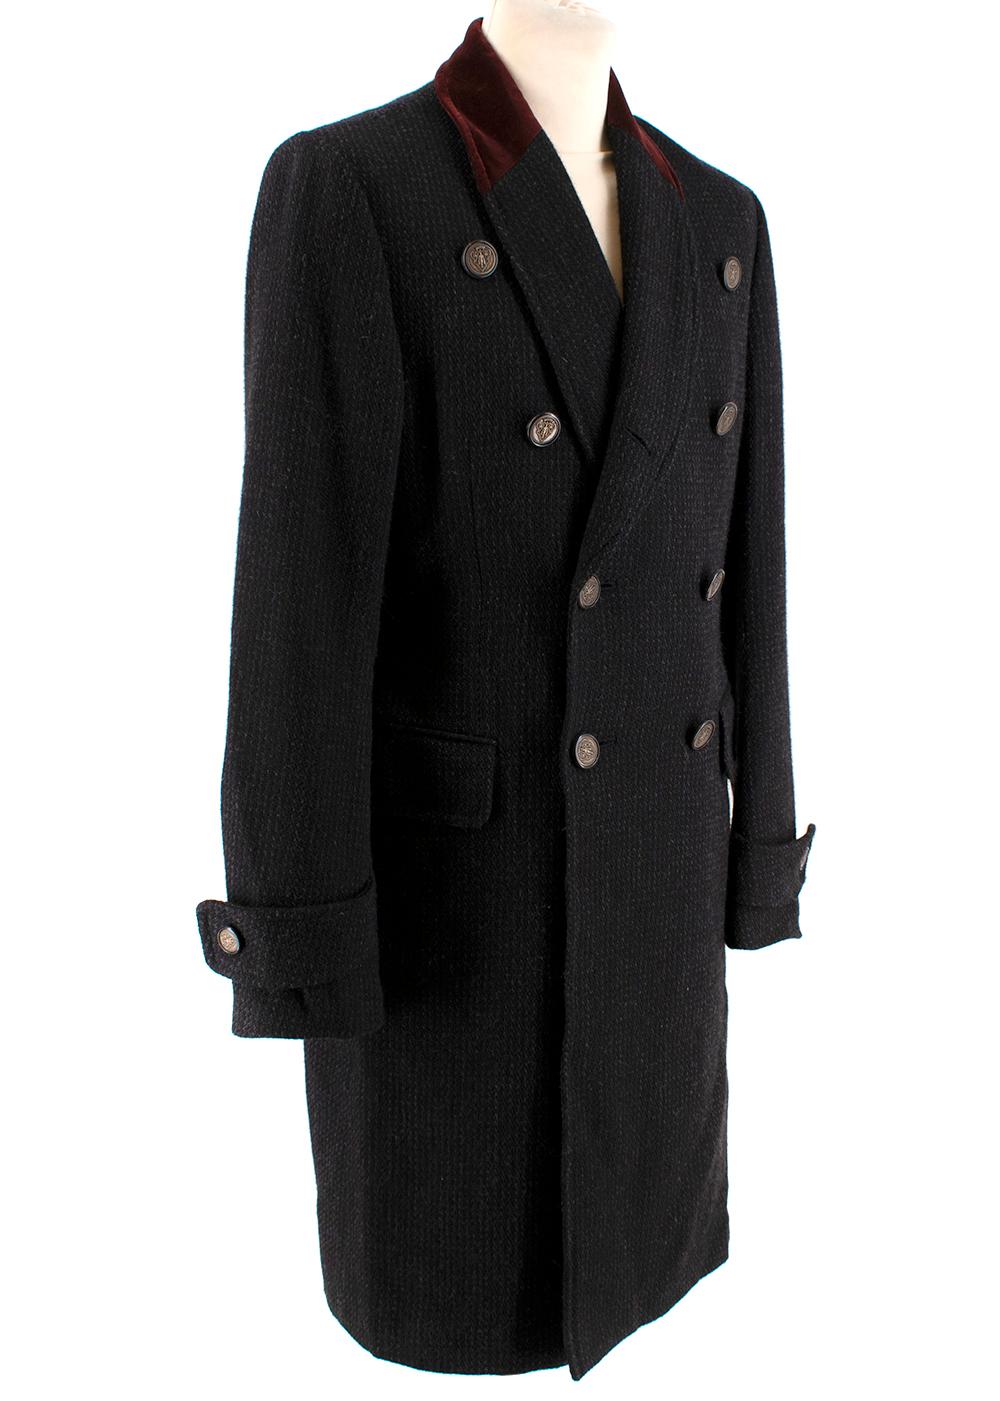 Gucci Black & Red Wool Double Breasted Coat 

- Made of soft wool 
- Classic double-breasted cut 
- Small pattern 
- Button fastening at the front 
- Buttoned cuffs 
- Pockets to the front
- 3 inner pockets 
- Red velvet detail to the collar  
-